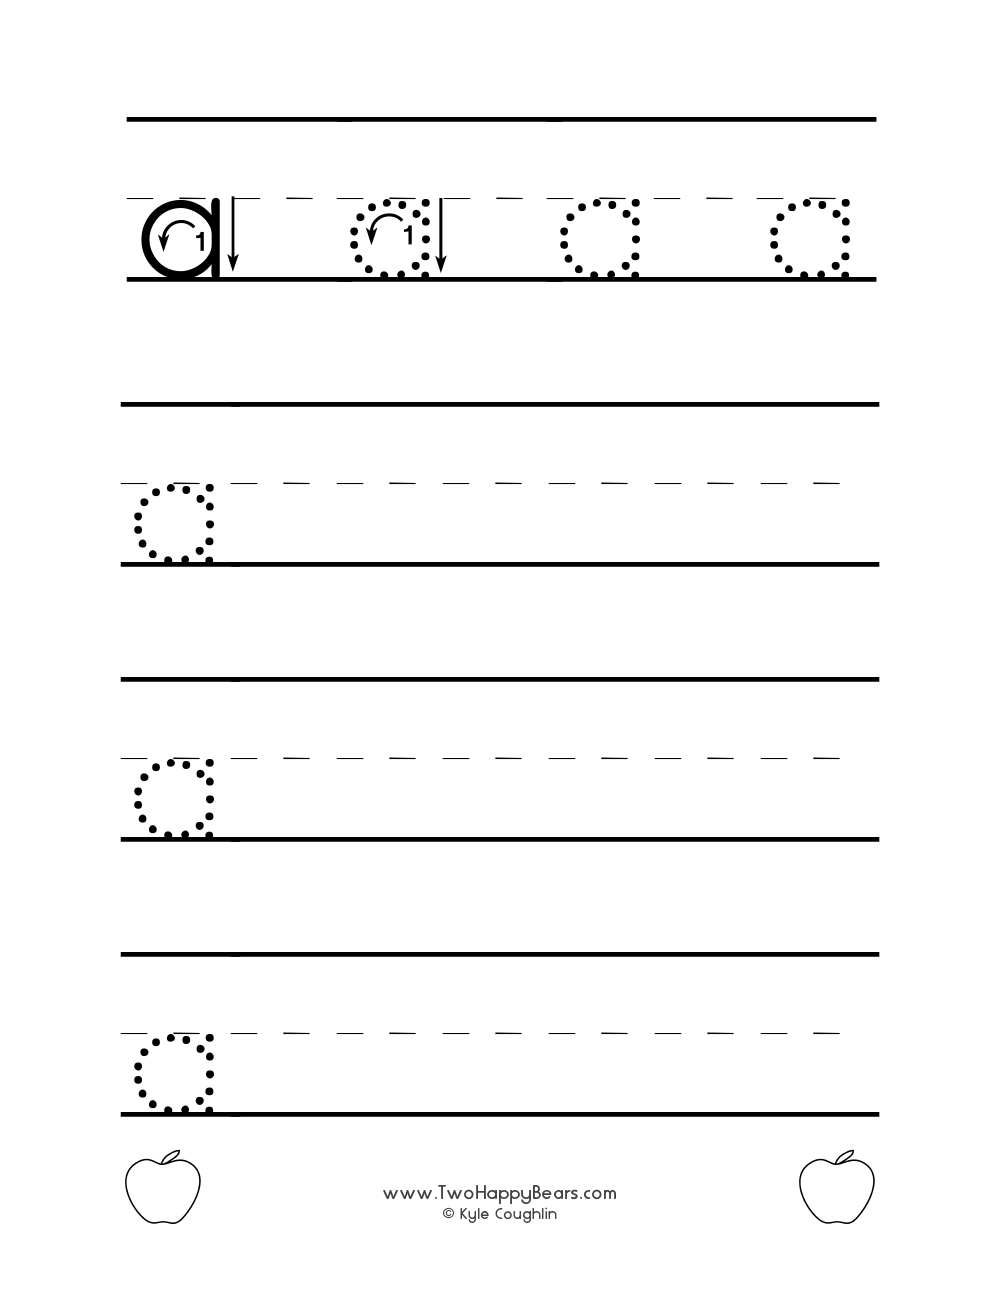 Lowercase letter A worksheet for tracing and drawing